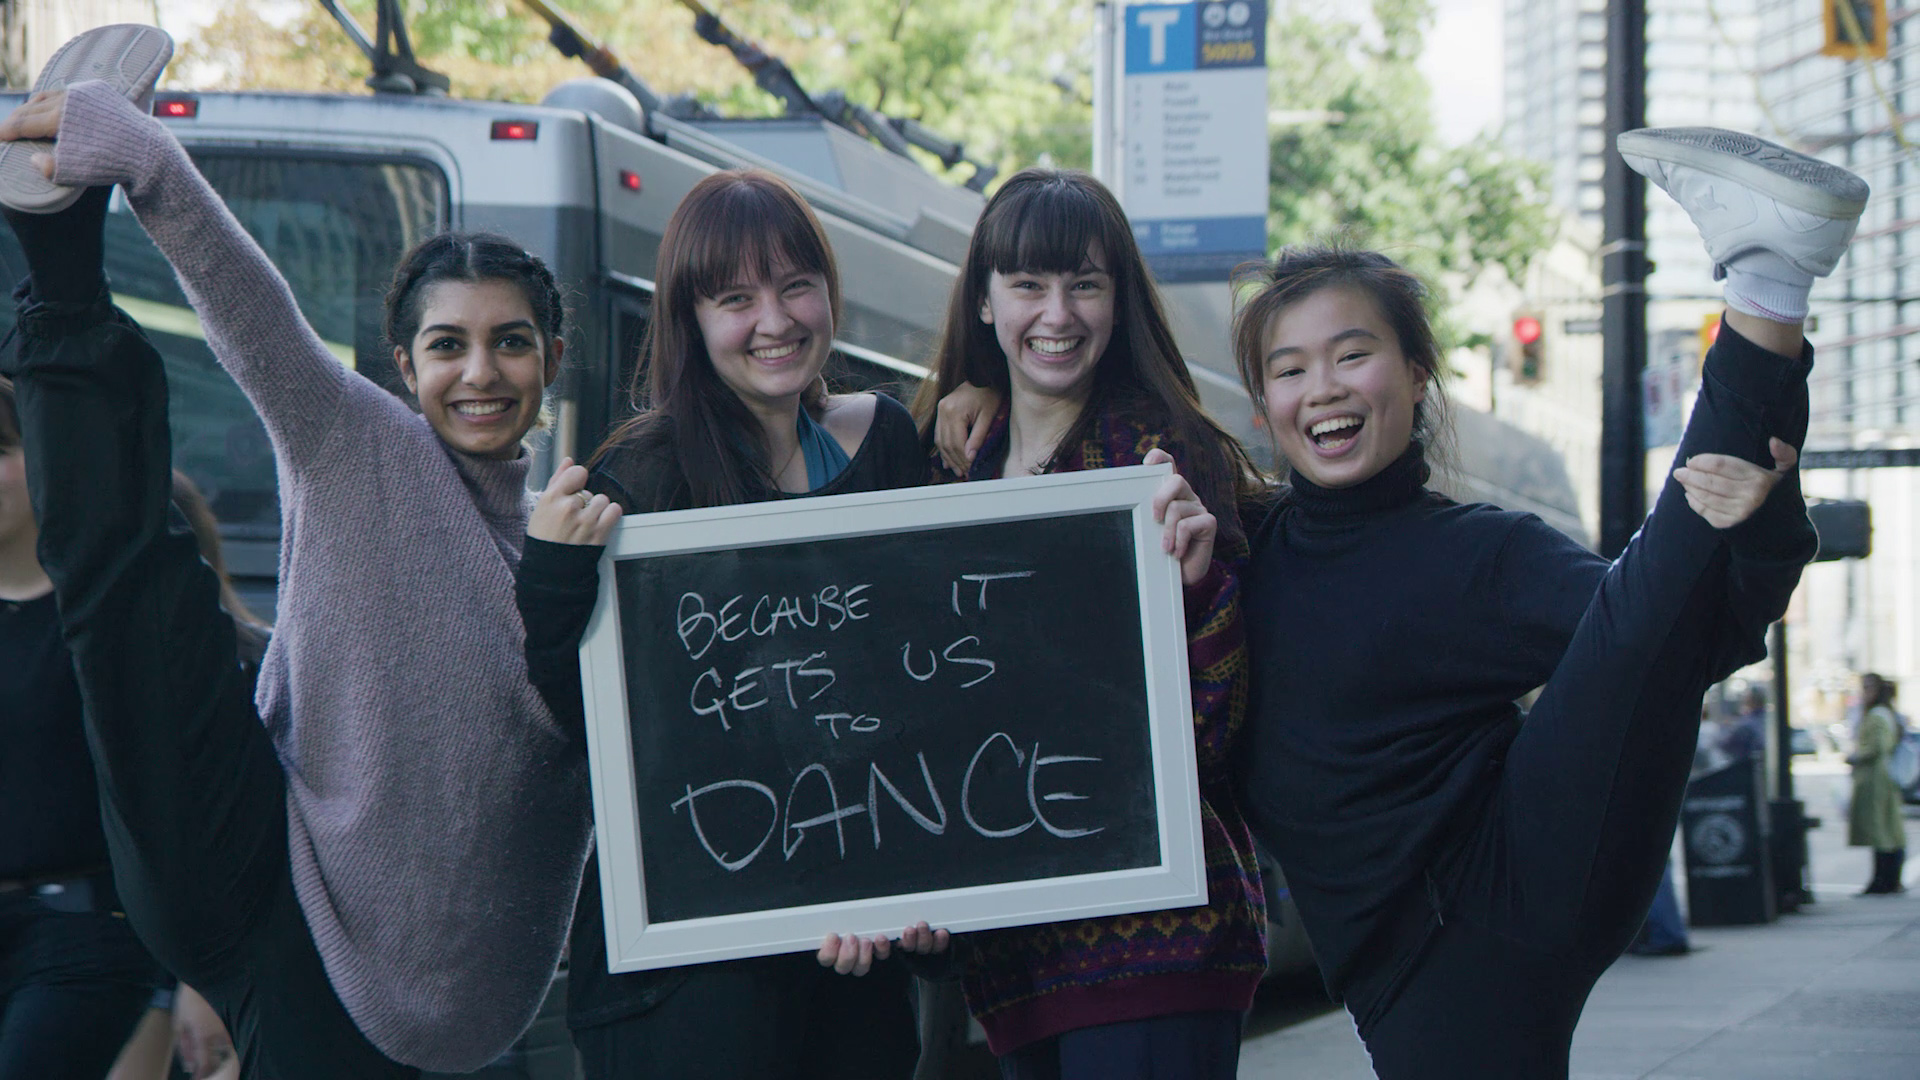 Four SFU School of Contemporary Arts students pose behind a chalk board that reads "Because it gets us to dance" 